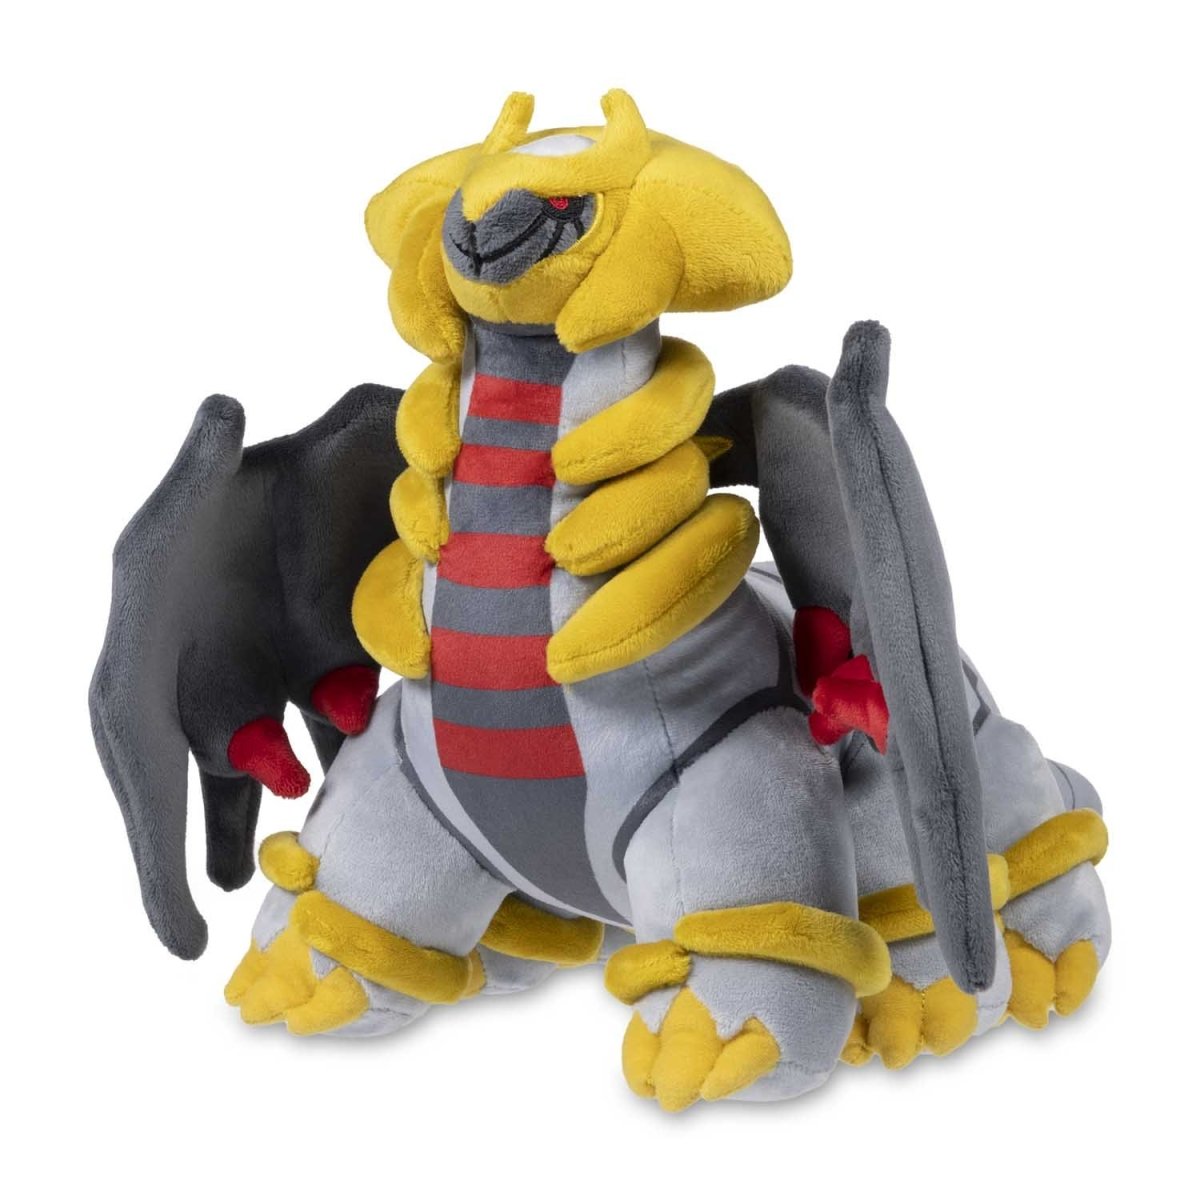 Can Giratina be shiny in the Distortion World?